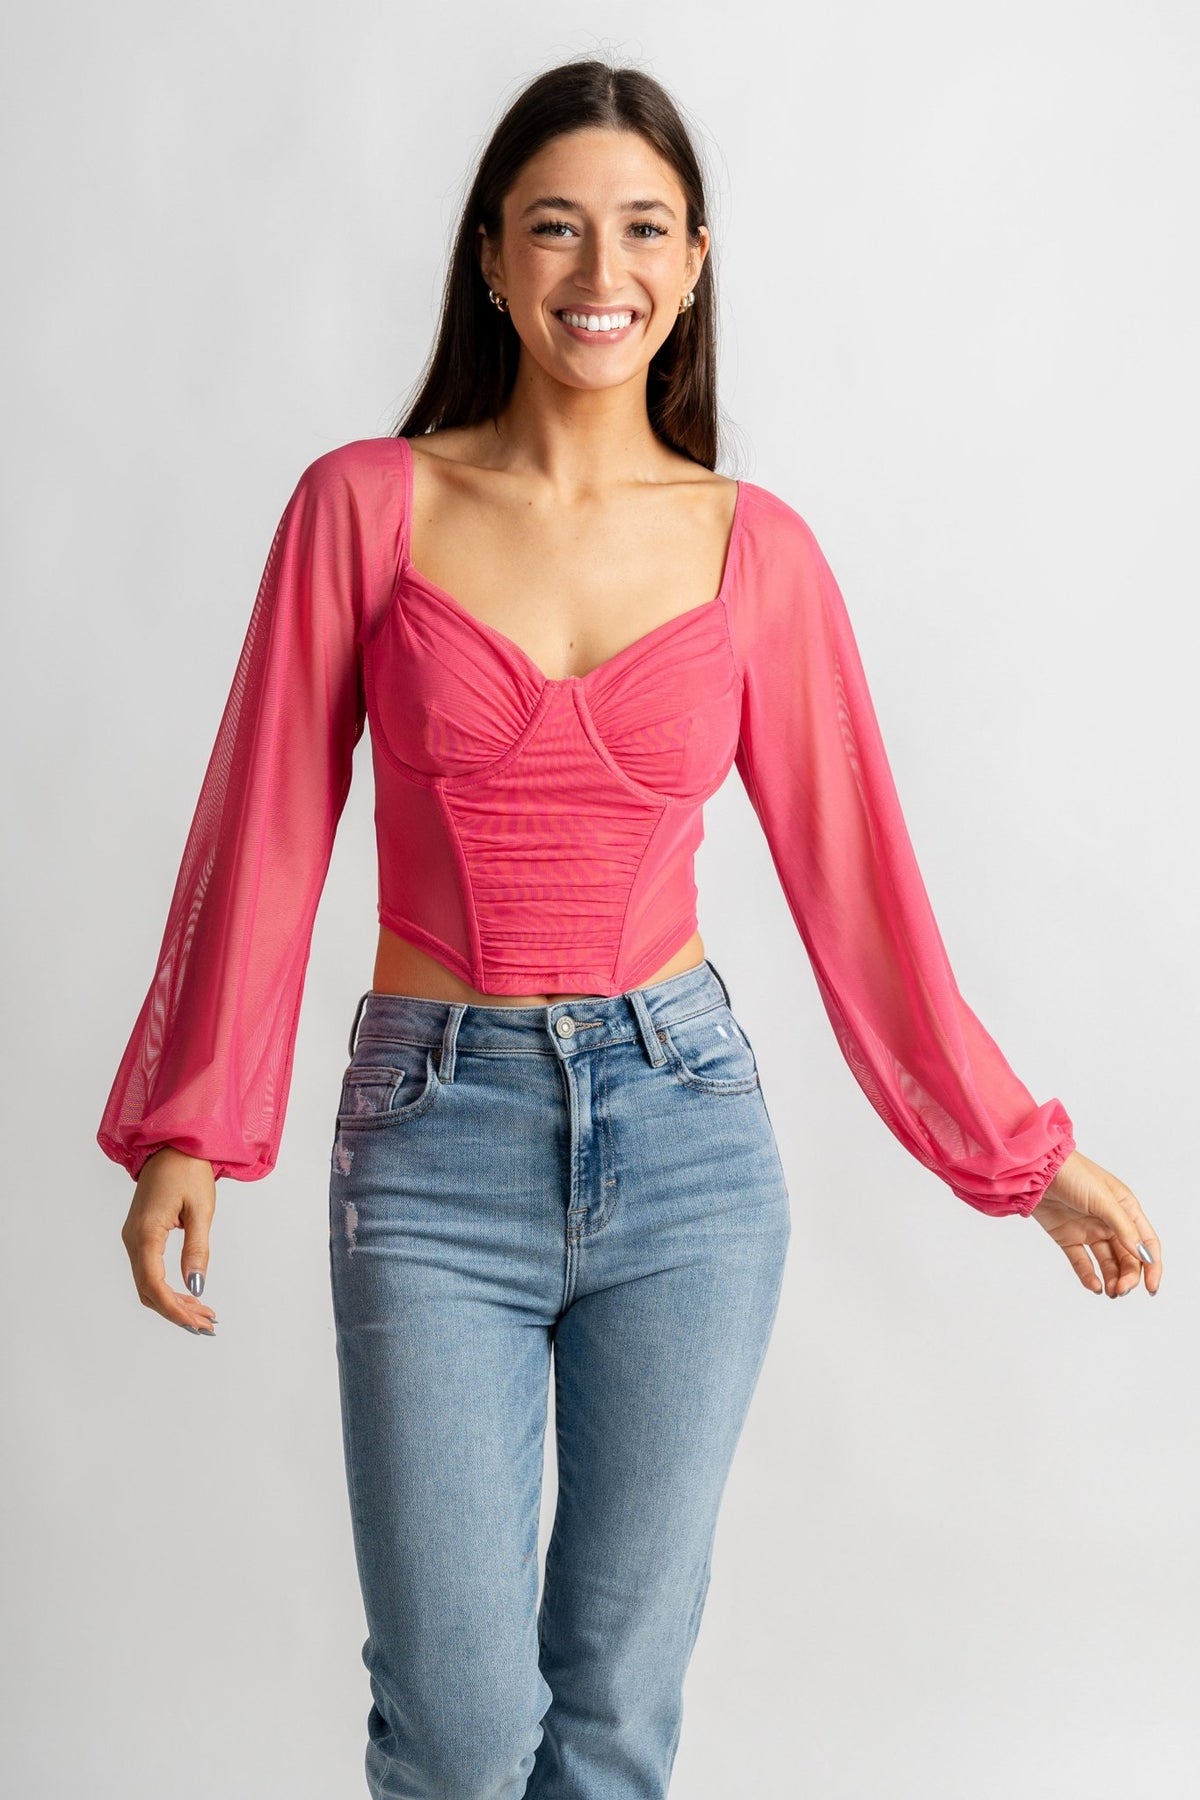 Lace mesh corset long sleeve top pink - Trendy T-Shirts for Valentine's Day at Lush Fashion Lounge Boutique in Oklahoma City